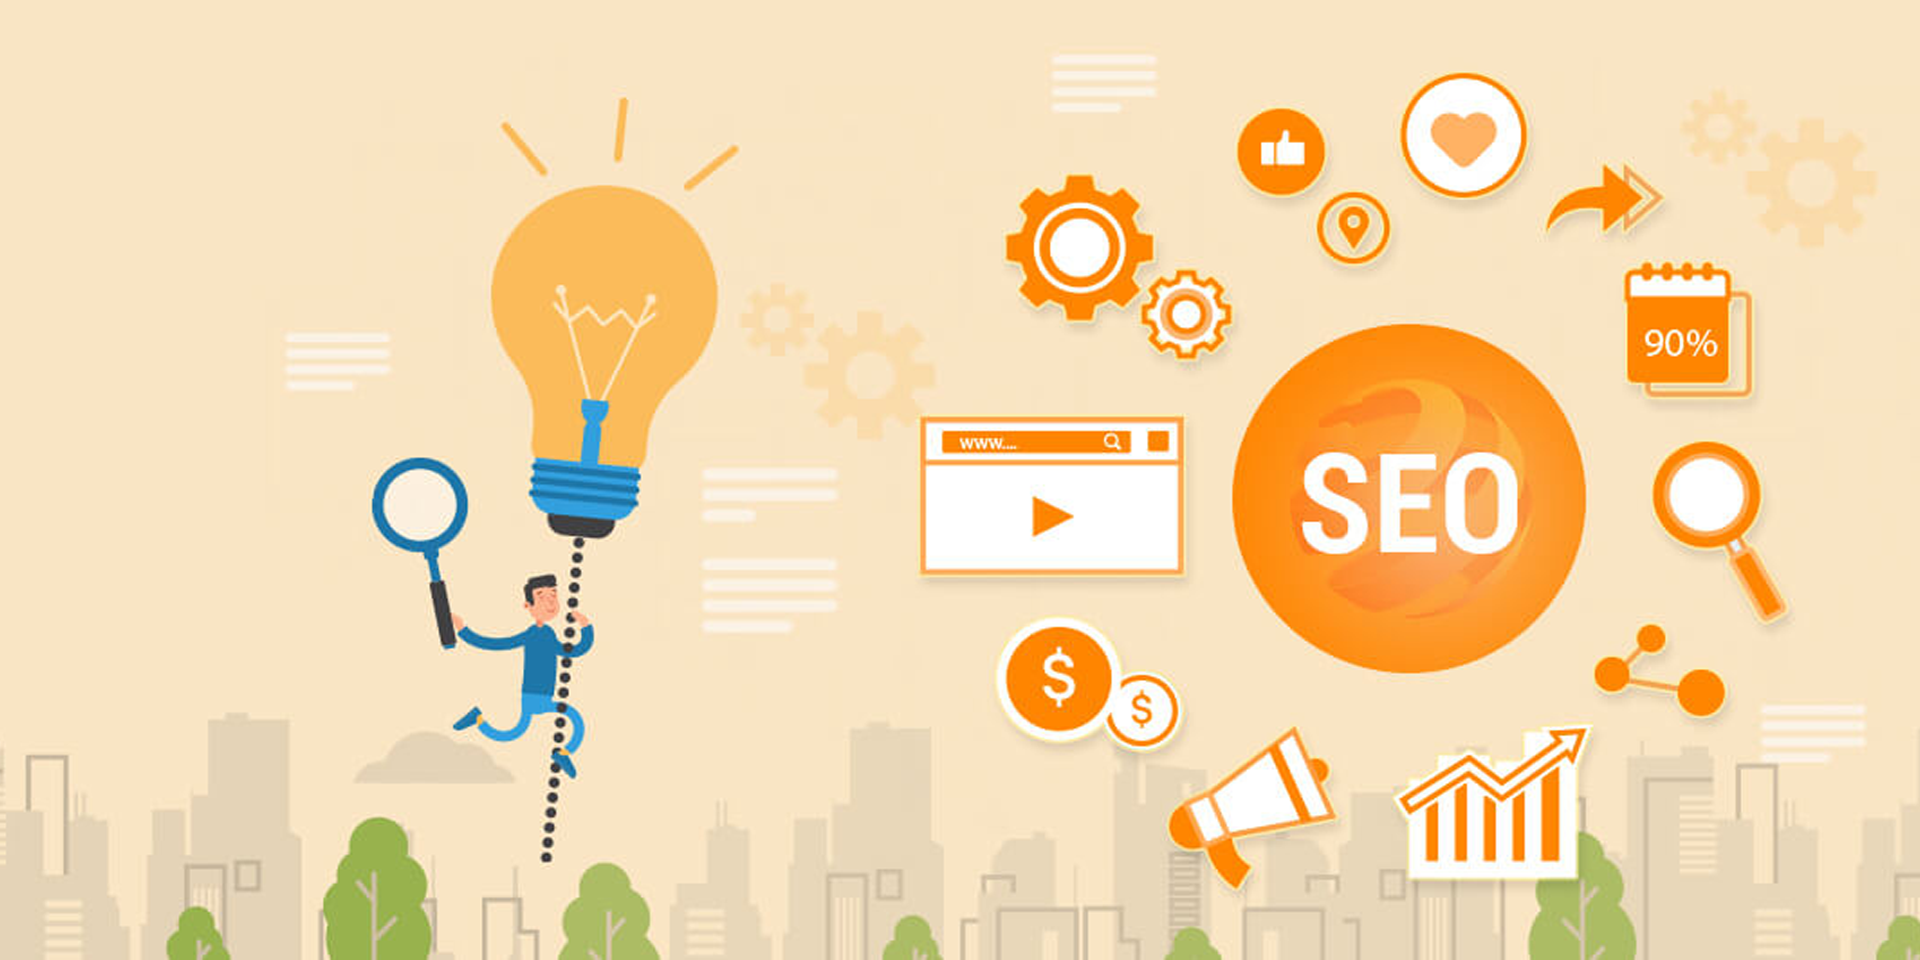 Best SEO Services To Stay On Page #1 of Google!